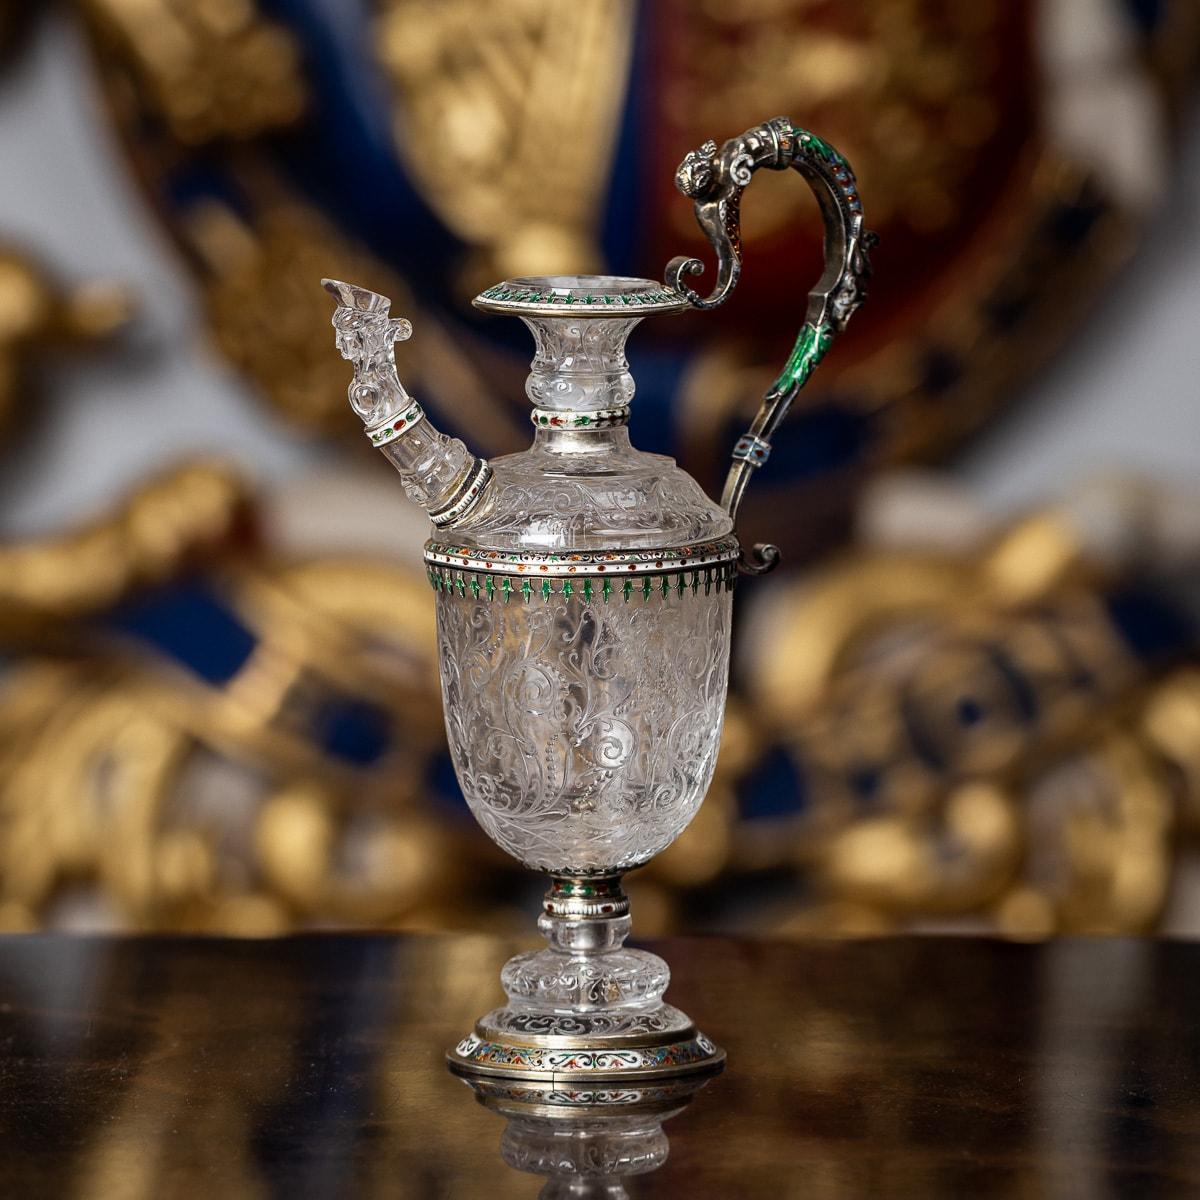 Antique 19th Century Austrian rare and unusual solid silver-gilt & enamel rock crystal ewer. The rock crystal engraved with chimeras among scrollwork, silver gilt mounts pierced and enamelled. The caryatid scroll handle with satyr head terminal.